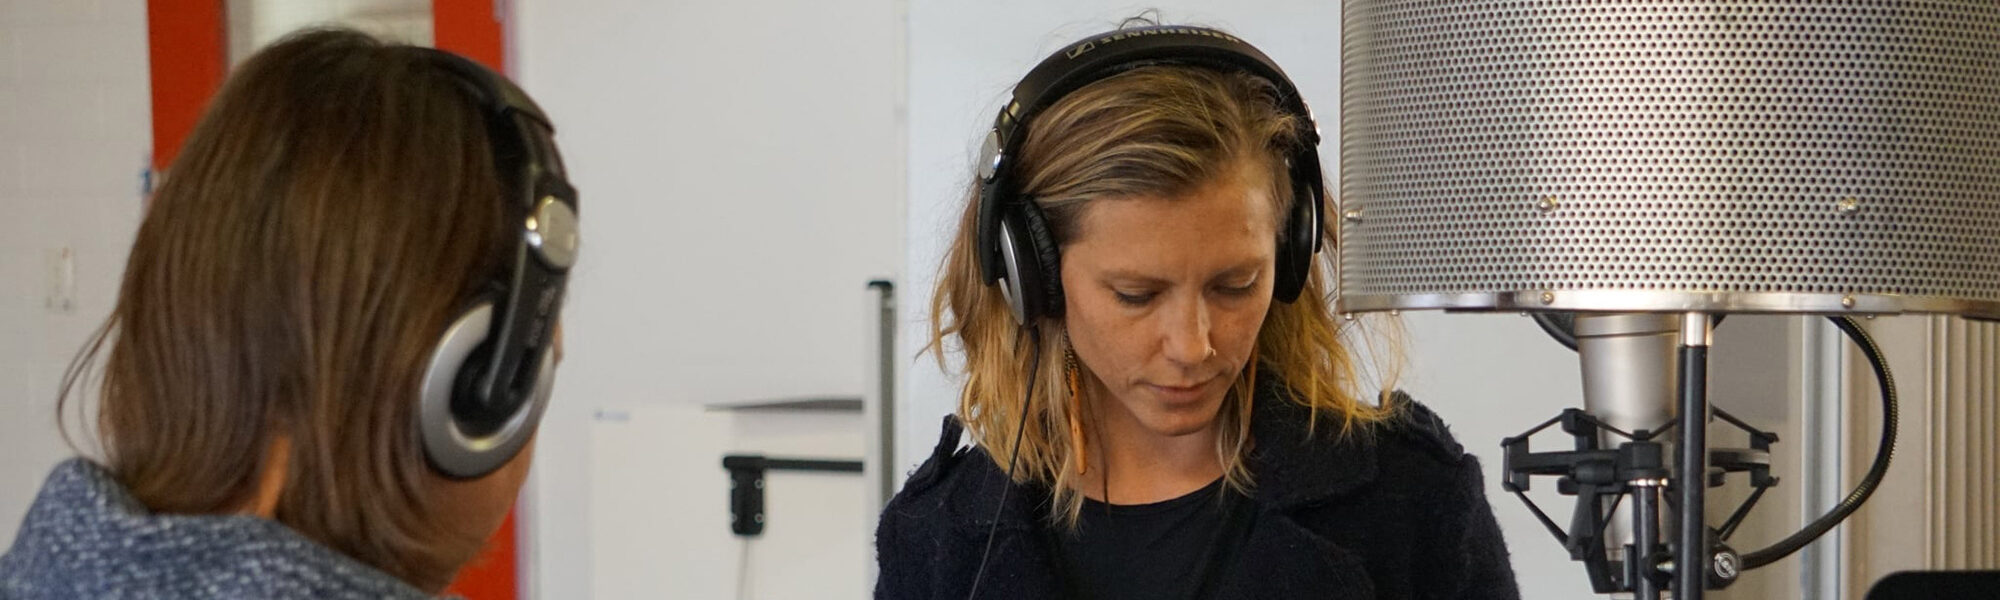 two females with headphones on